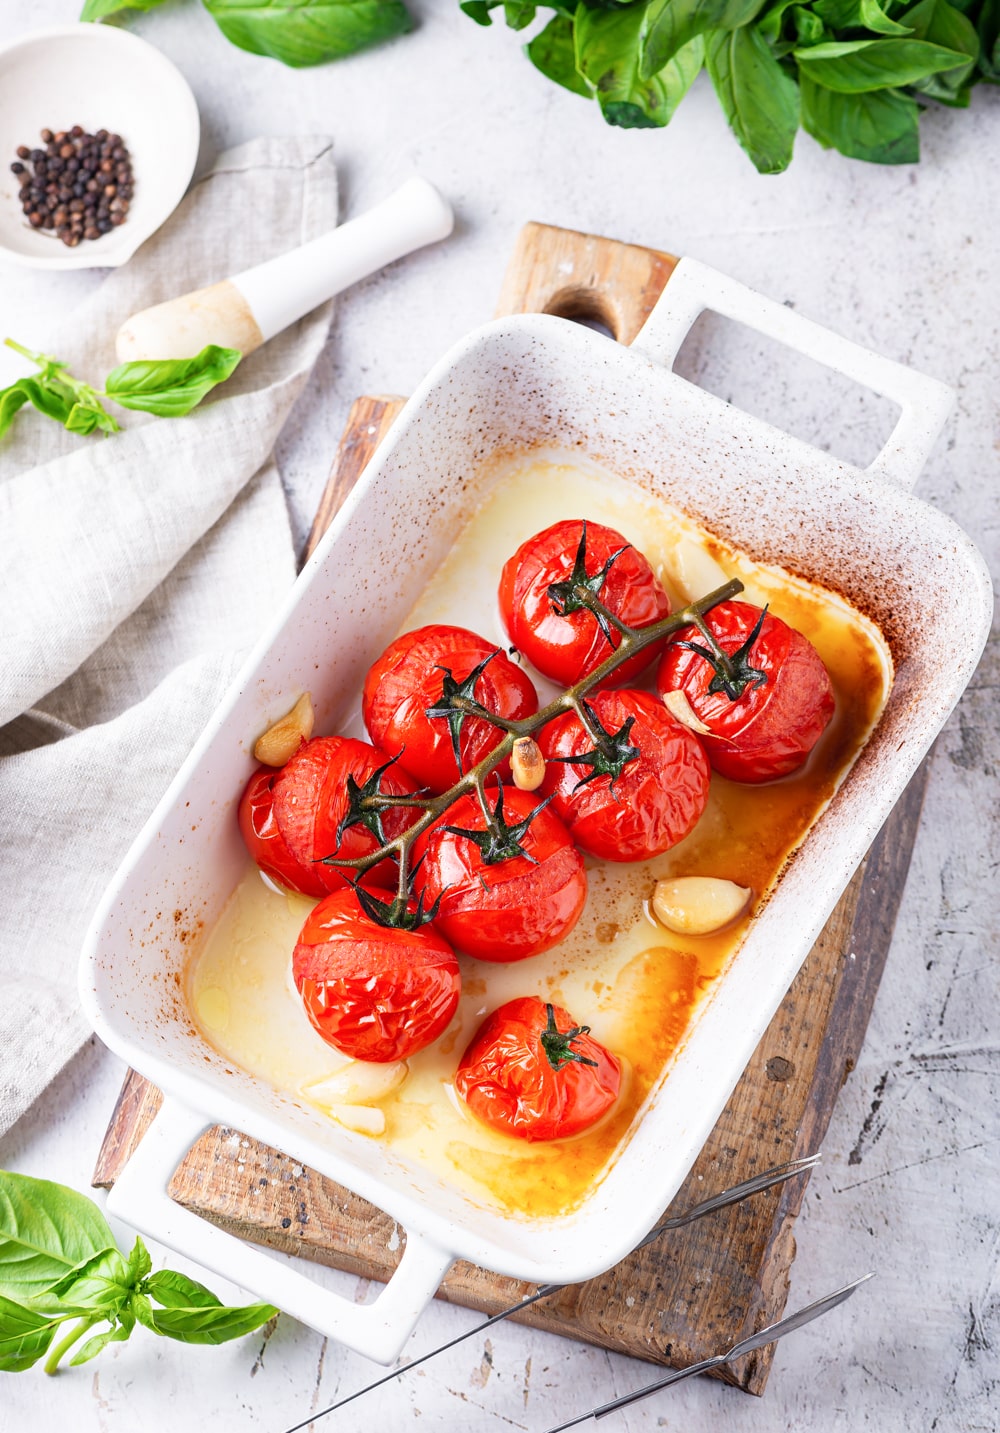 Tomatoes and garlic that have been cooked in a white baking dish.